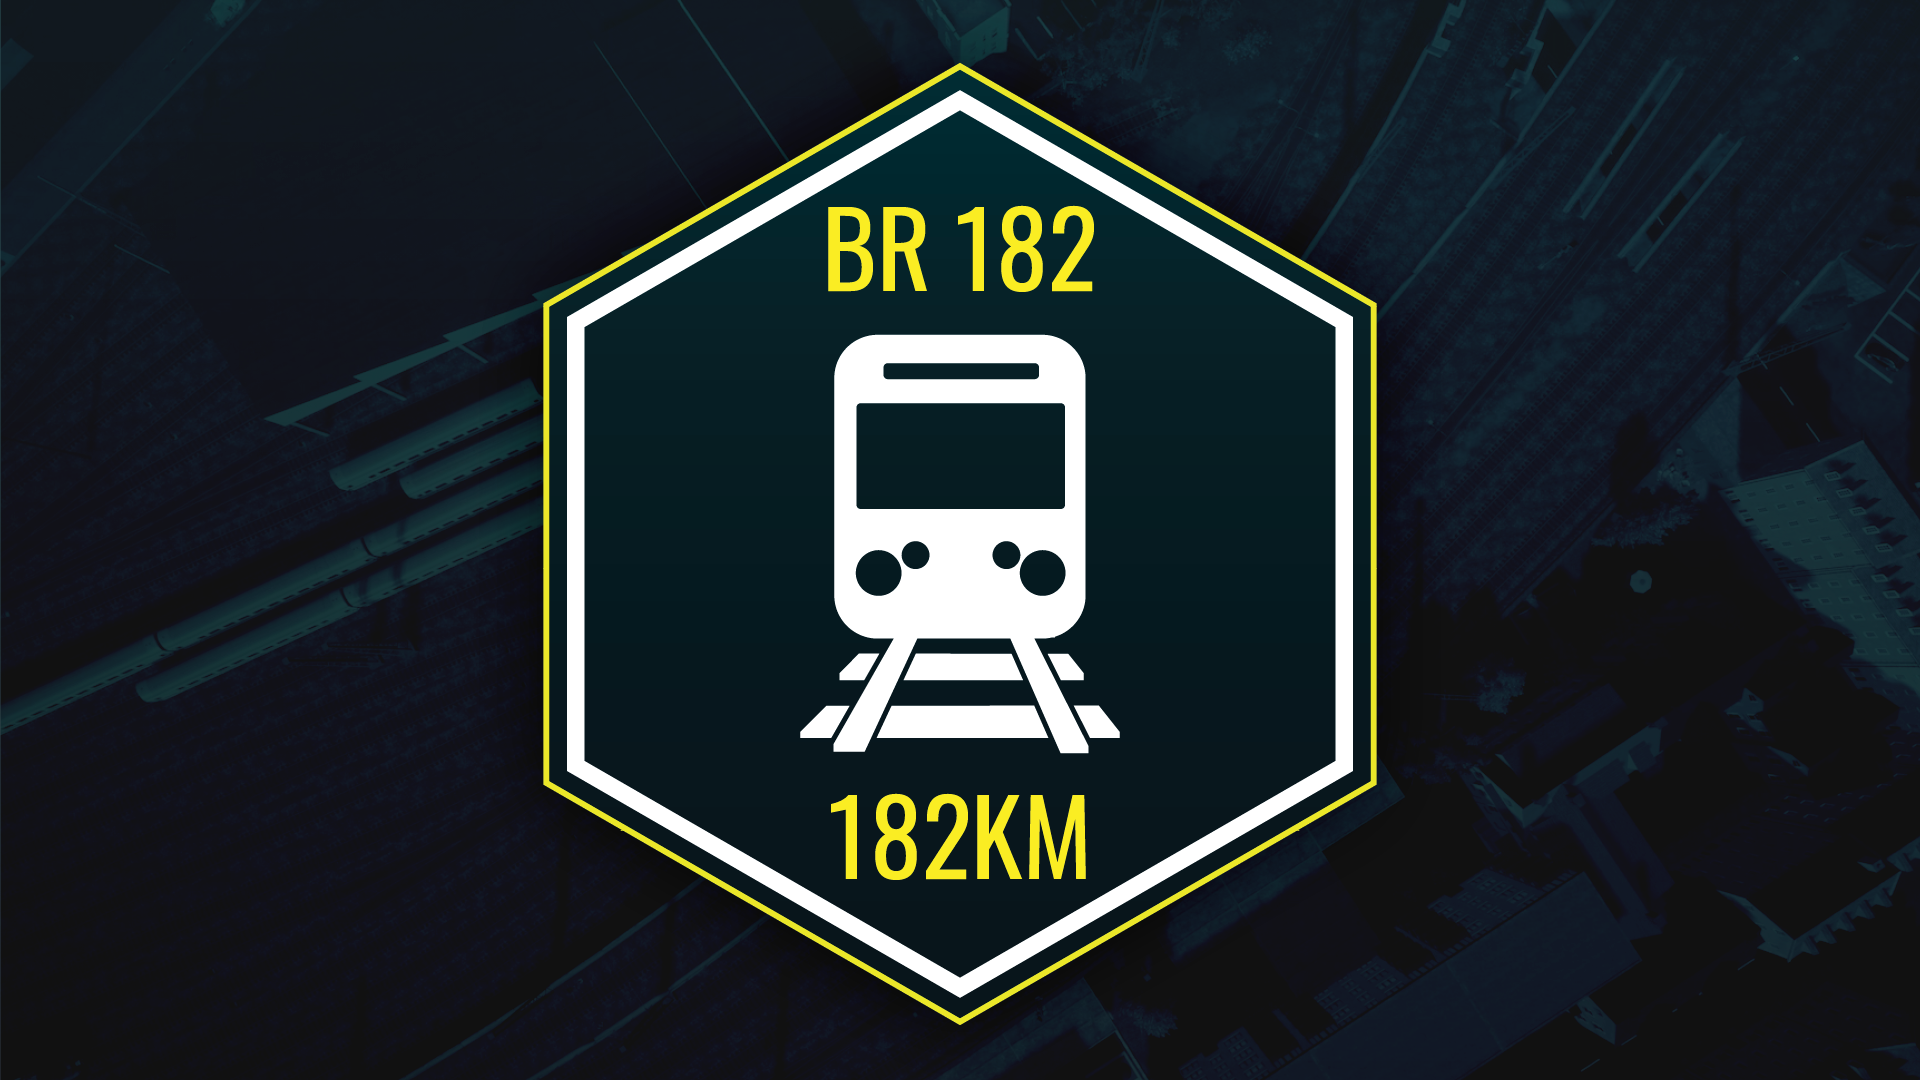 BR 182: Blink and You'll Miss It